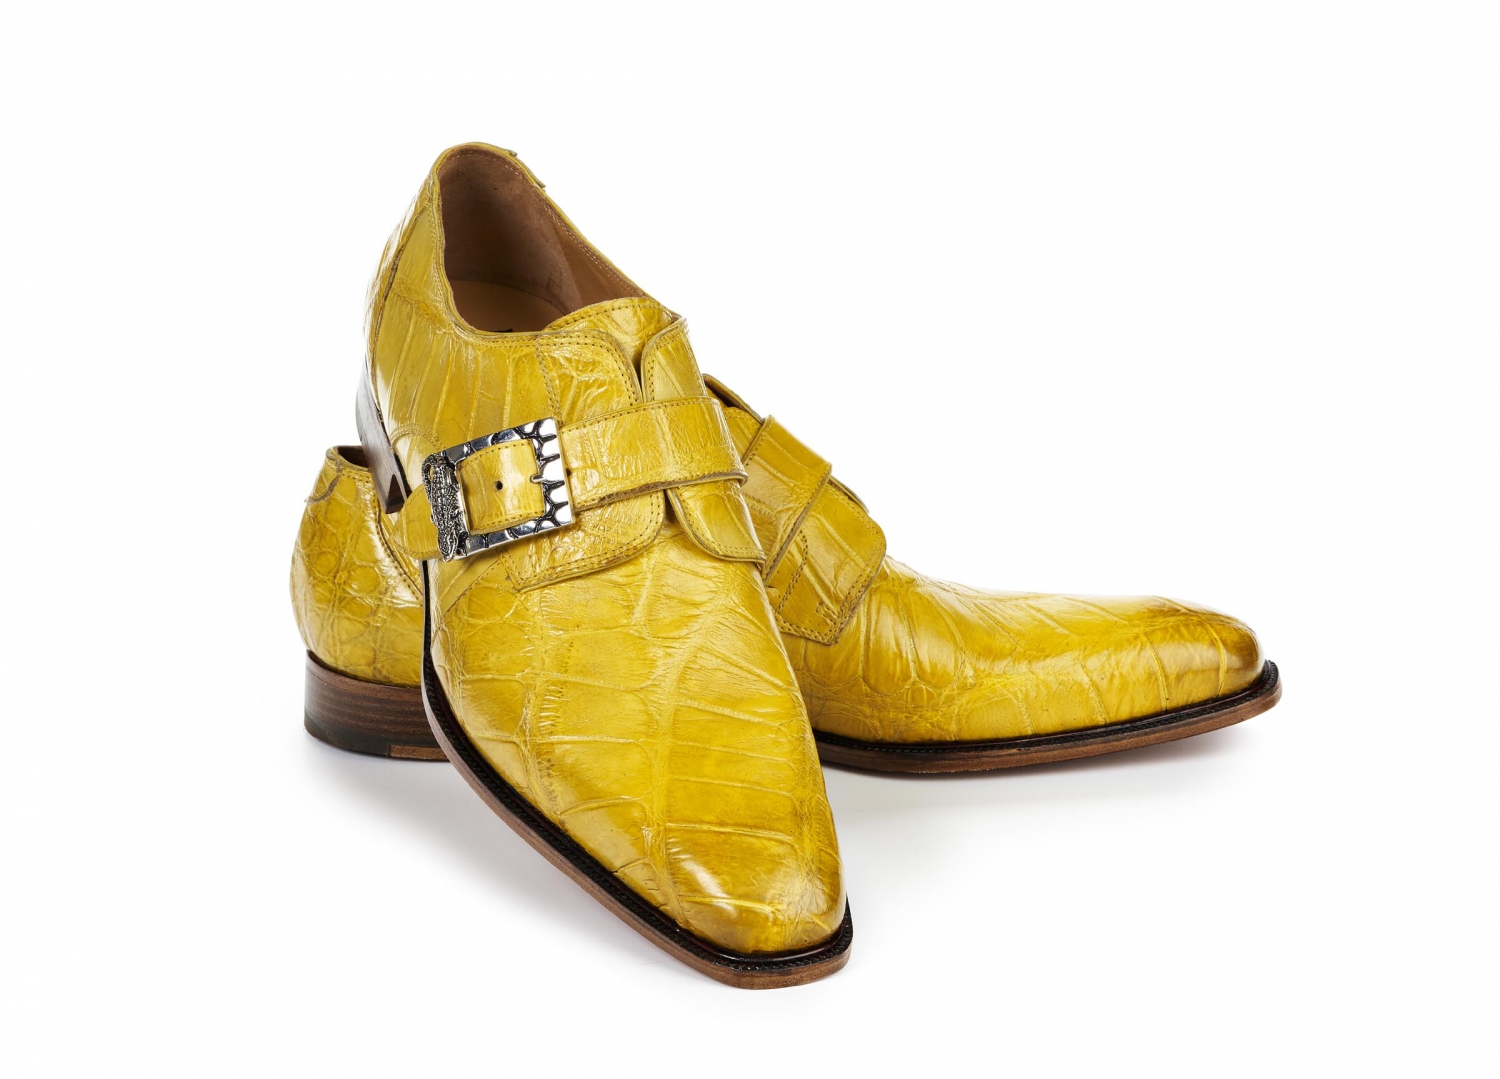 Mauri "Steamboat" 4853/2 Yellow Burnished Genuine Body Alligator Hand Painted Monk Strap Loafer Shoes.